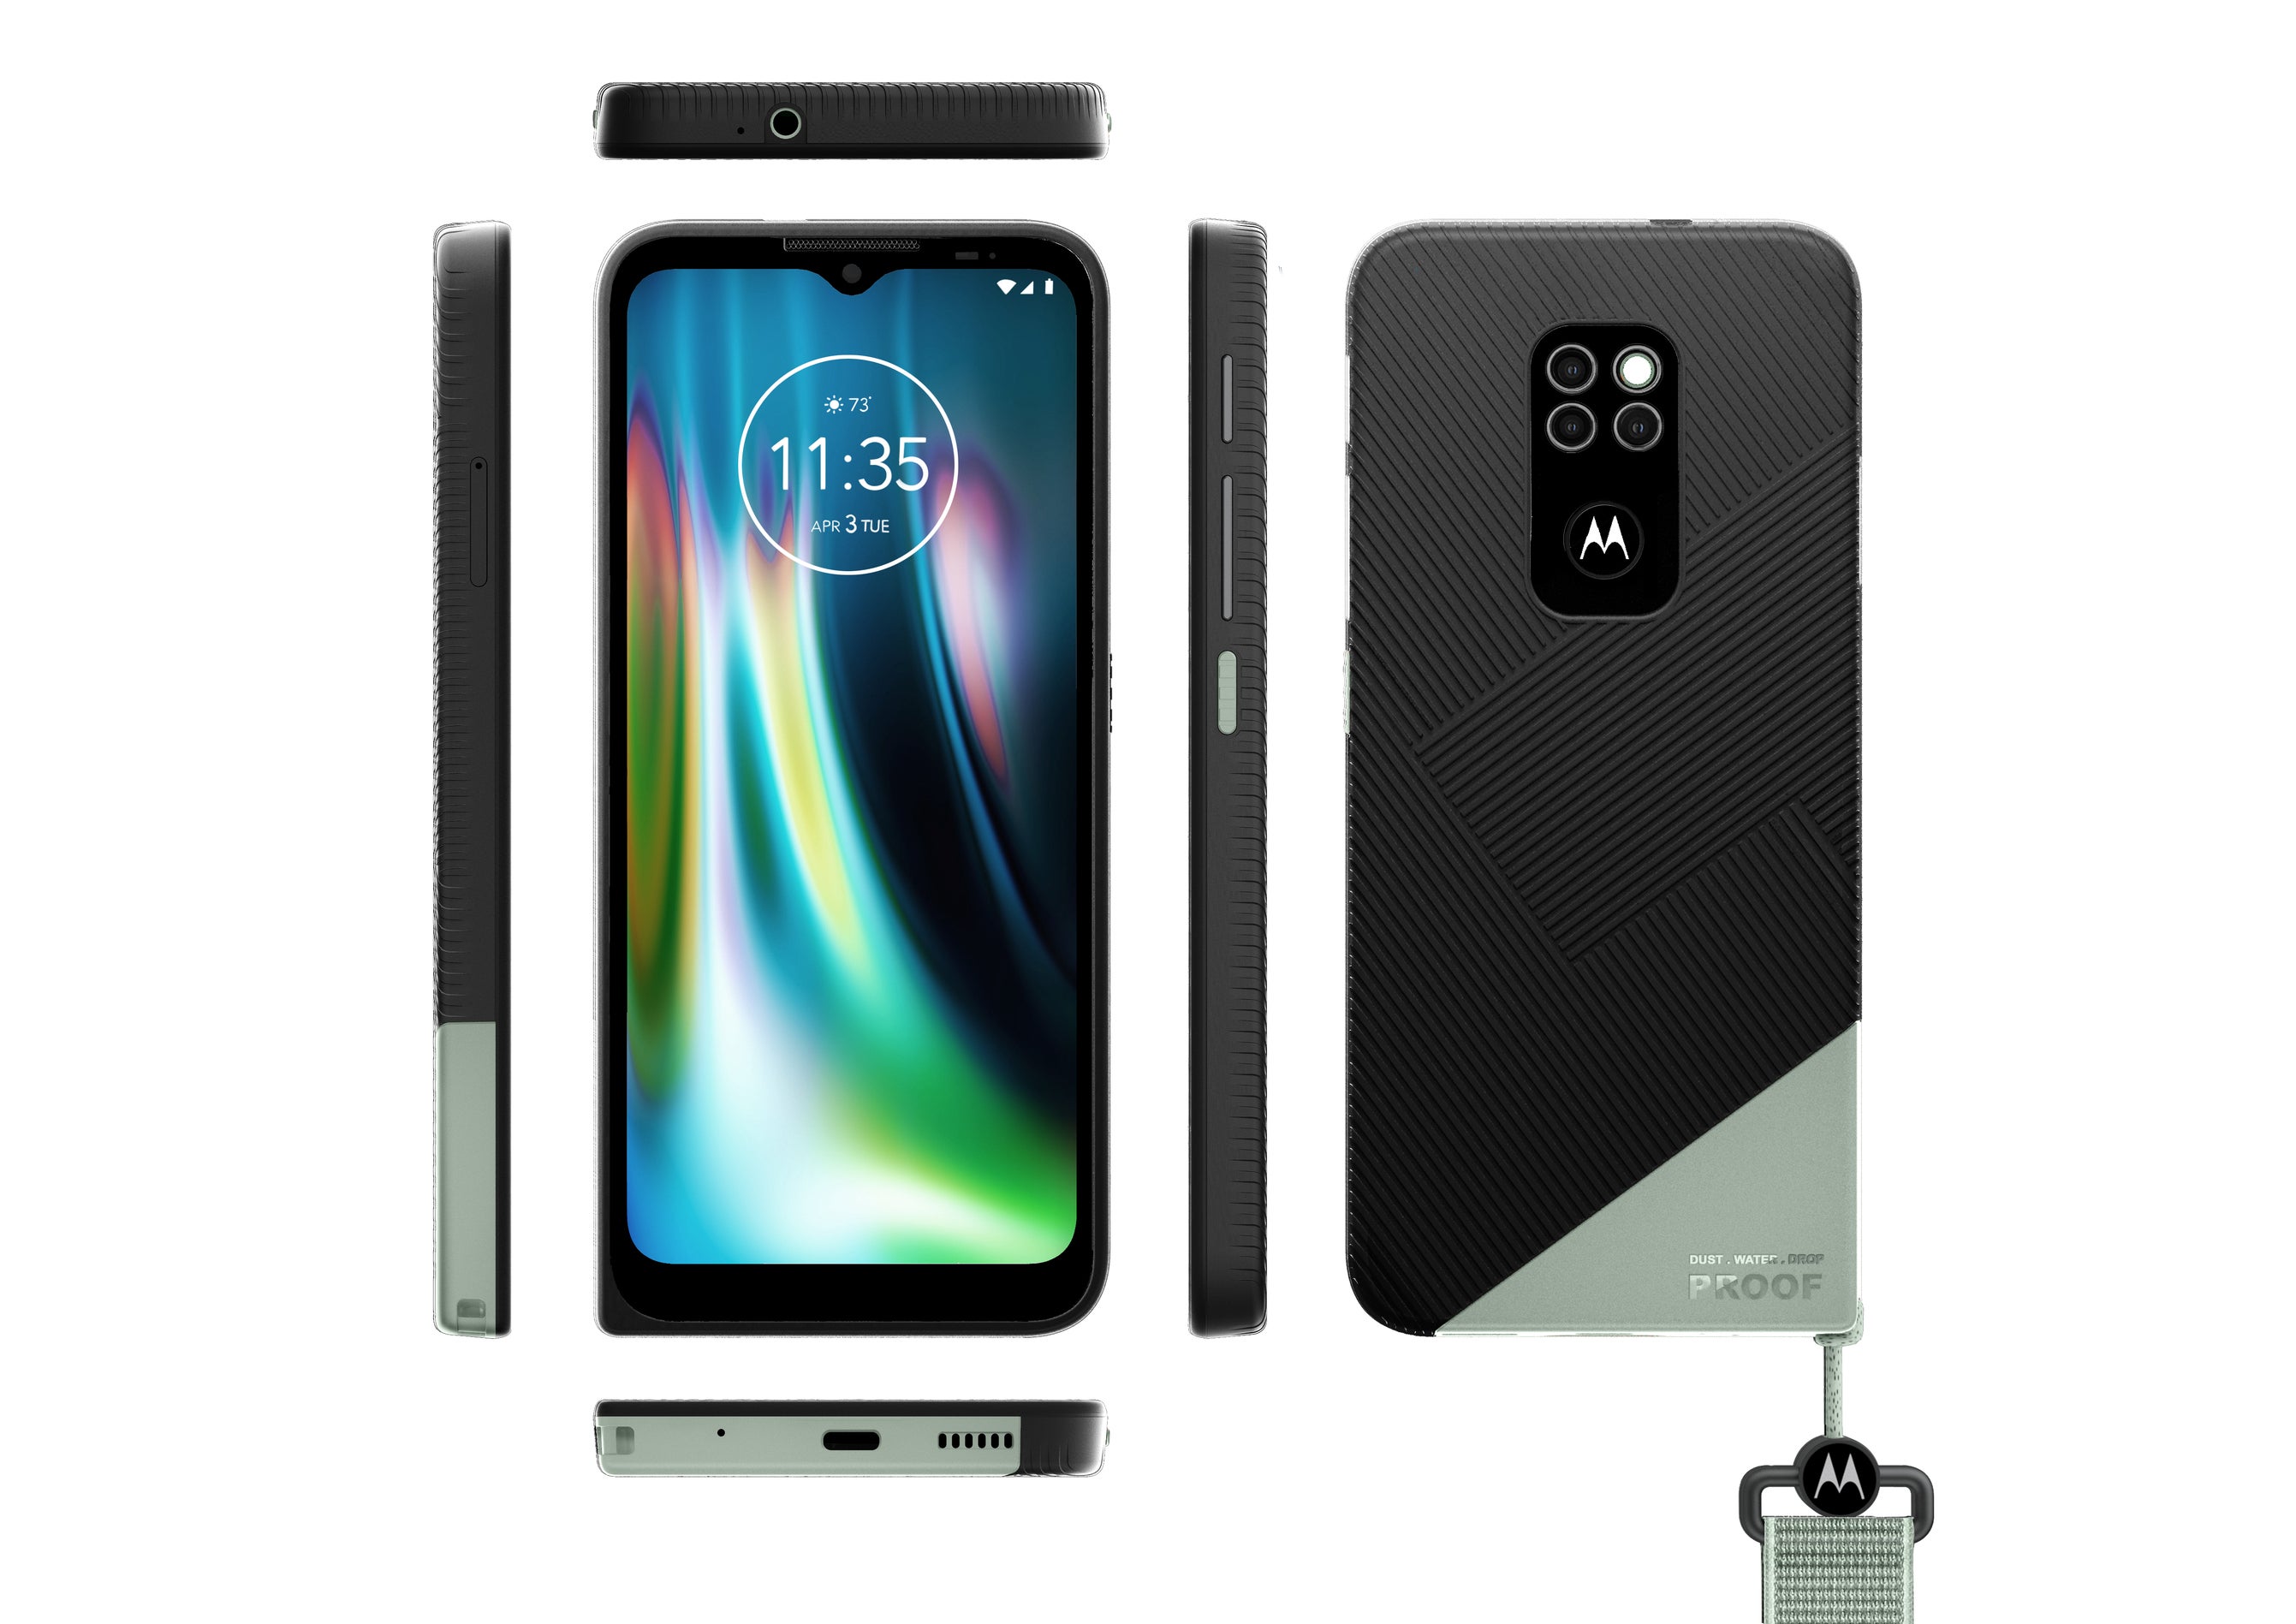 The 2021 Defy looks tough enough to withstand almost anything - Motorola Defy (2021) is official; The tough guy on the block